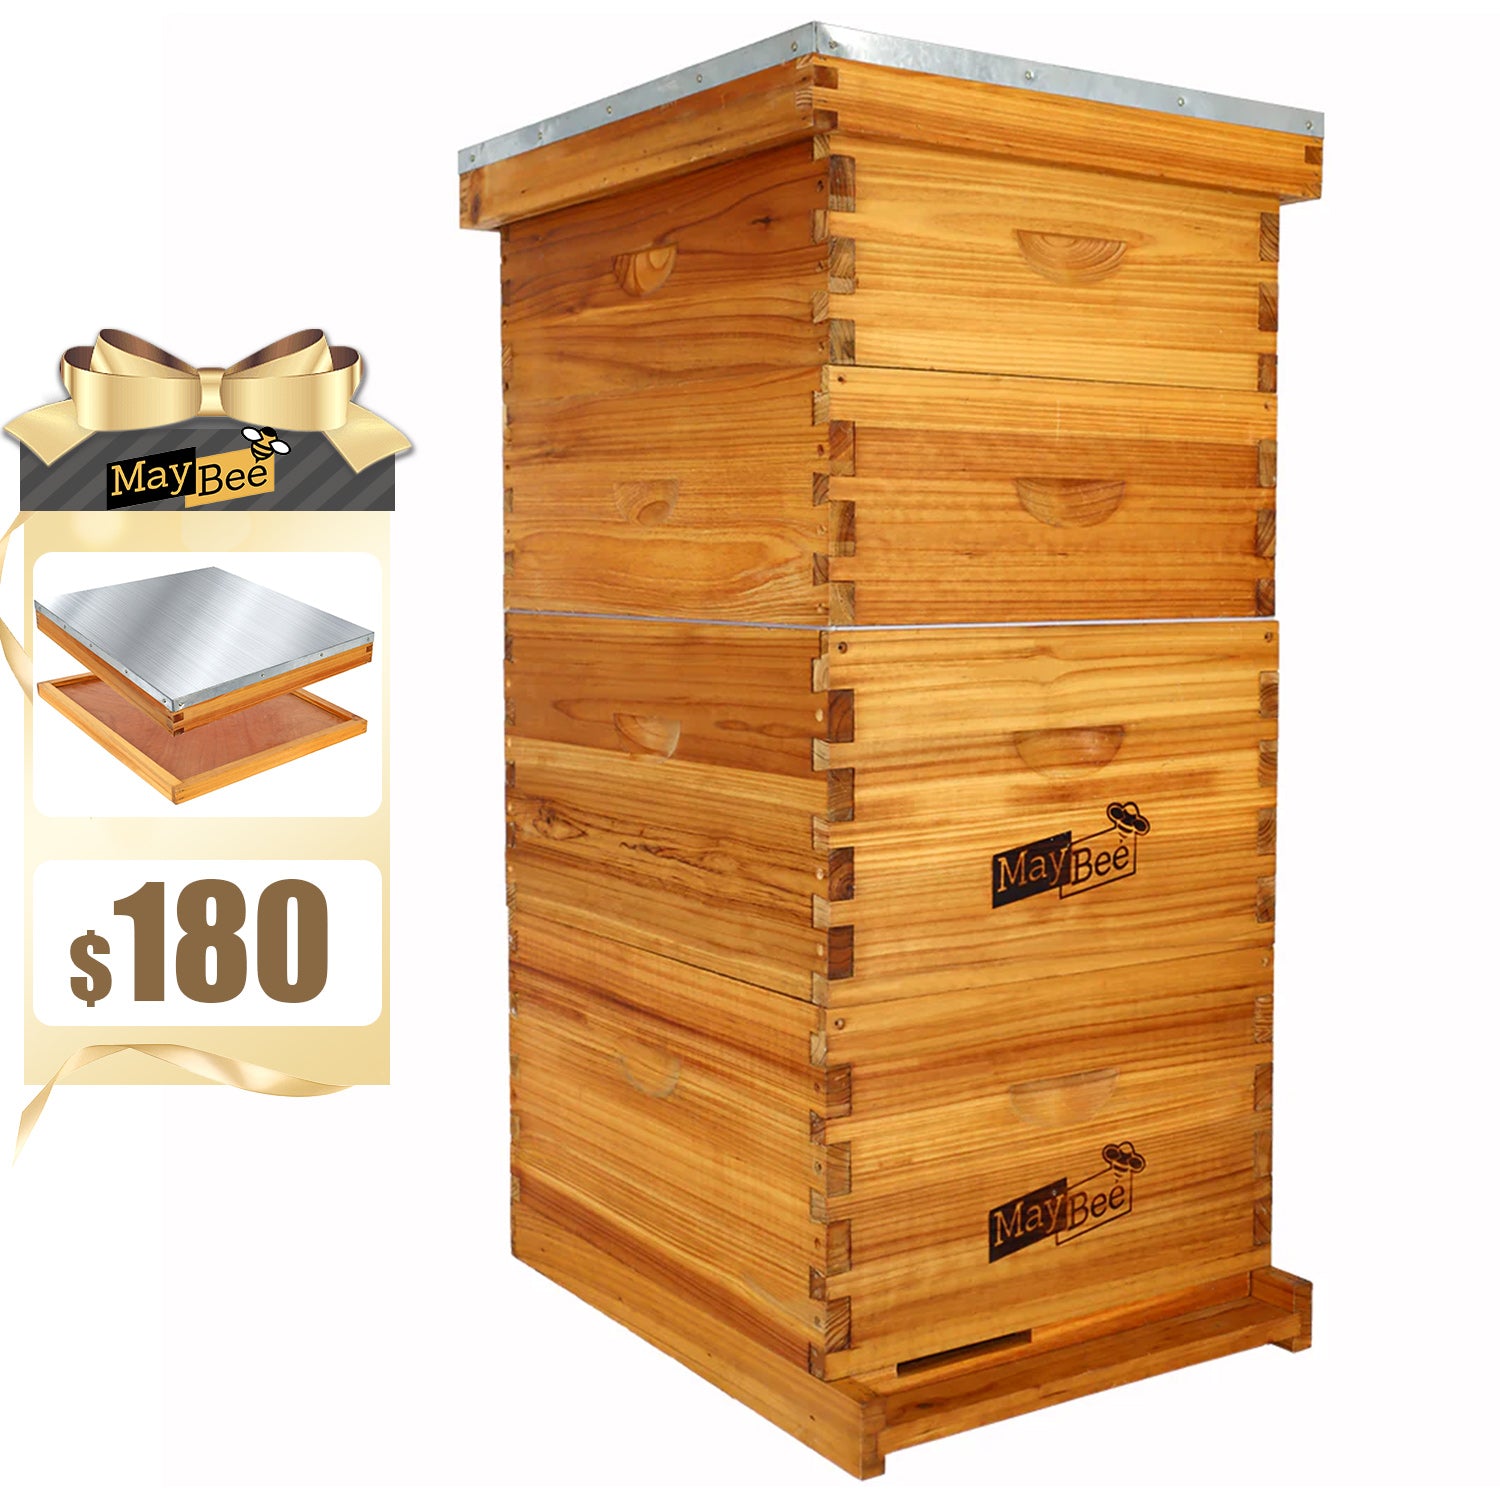 MayBee Hives 8 Frame 4 Layer Bee Hives Include 2 Deep Bee Box And 2 Super  Box